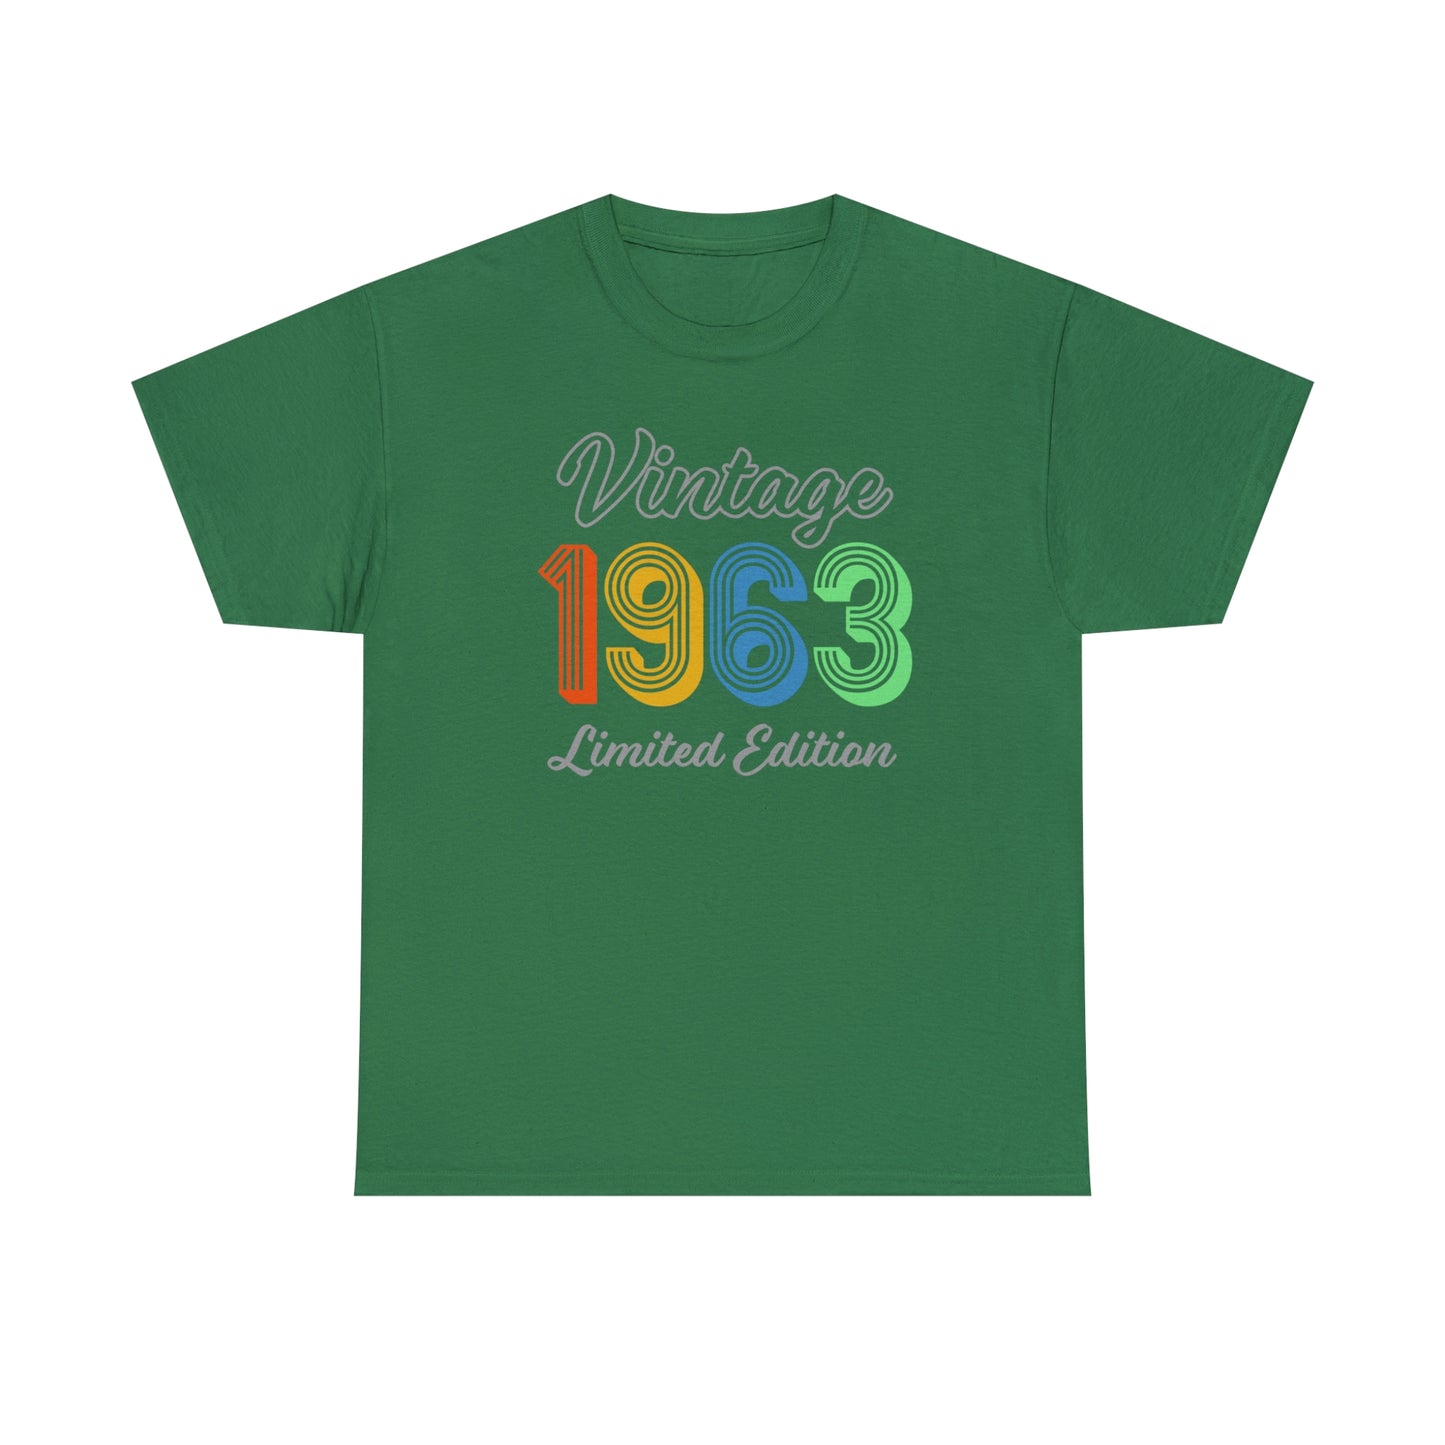 Vintage 1963 T-Shirt For Limited Edition TShirt For Class Reunion T Shirt For Birthday Shirt For Birthday Gift For Graduation TShirt